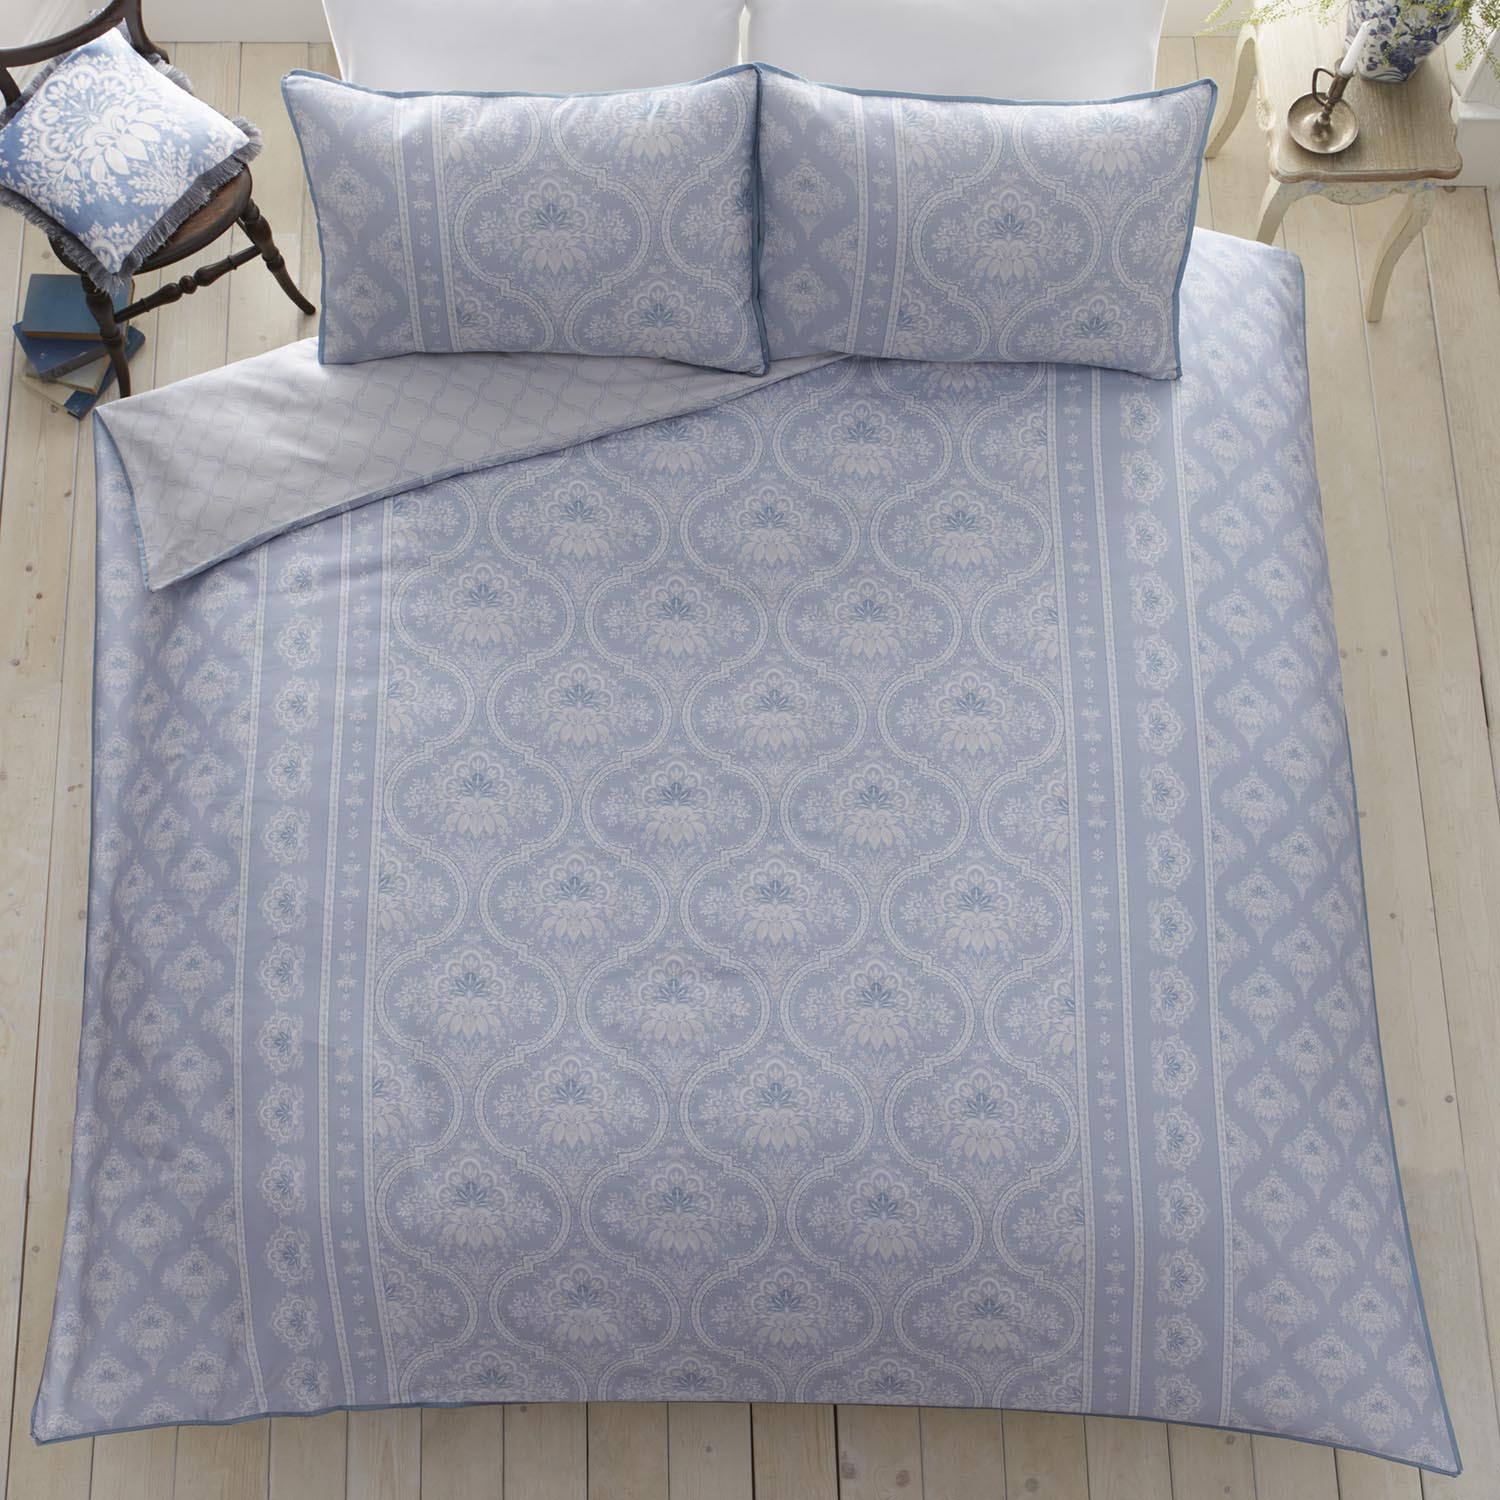  Heather And Ferne Alexandria Blue Duvet Cover Set 2 Shaws Department Stores